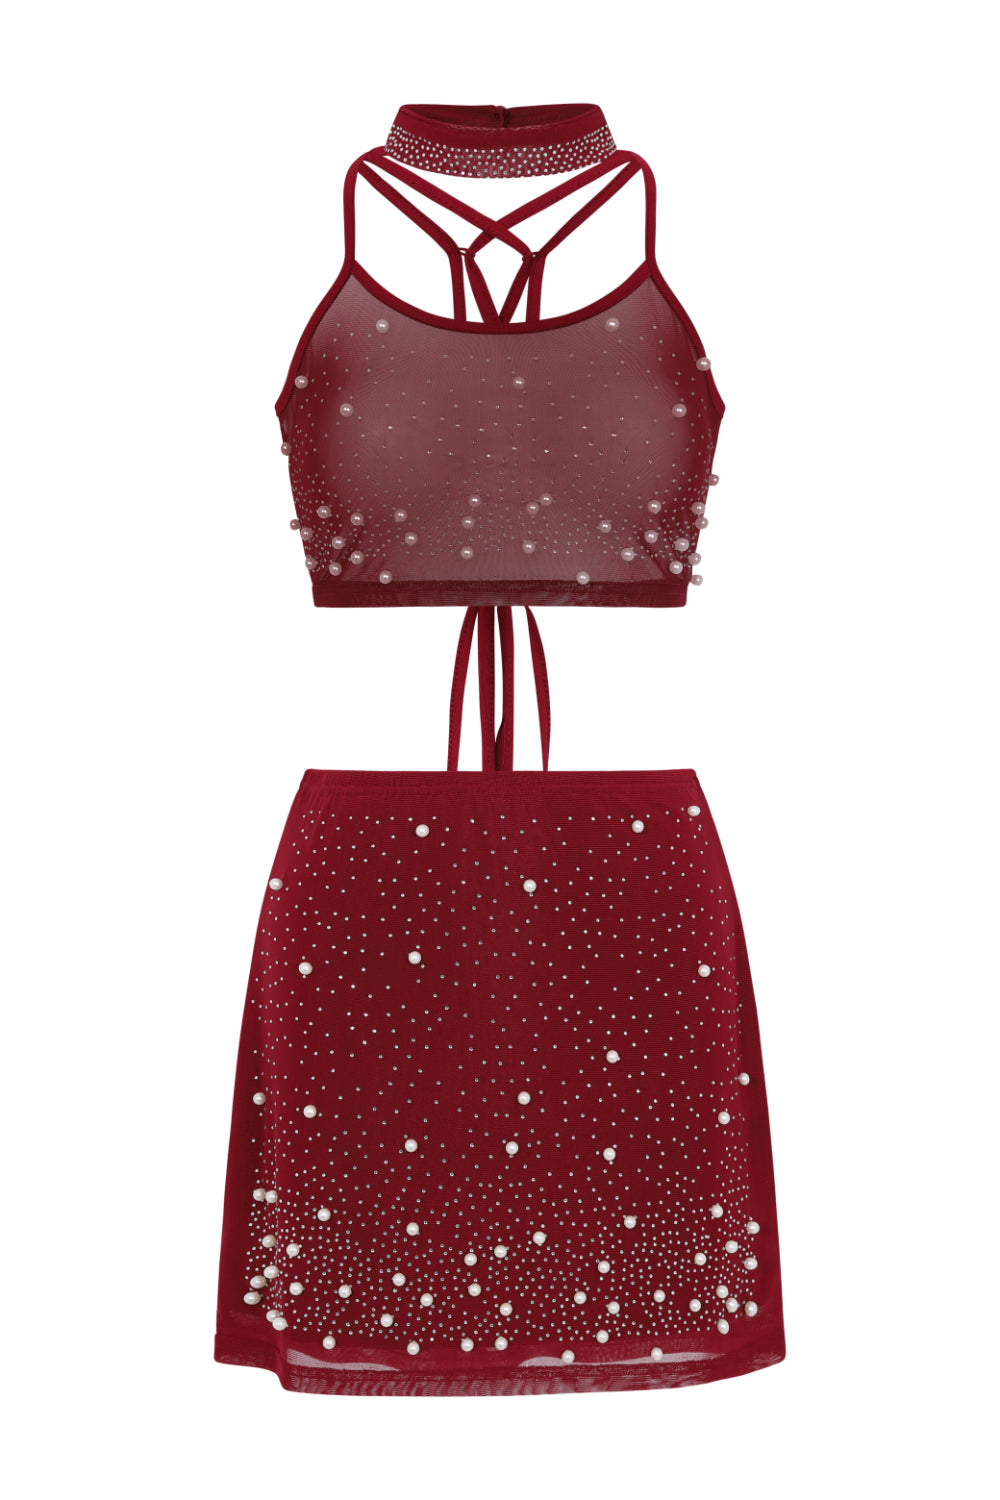 Caution Vip Berry Rhinestone & Pearls Two Piece Skirt Top Co Ord Set